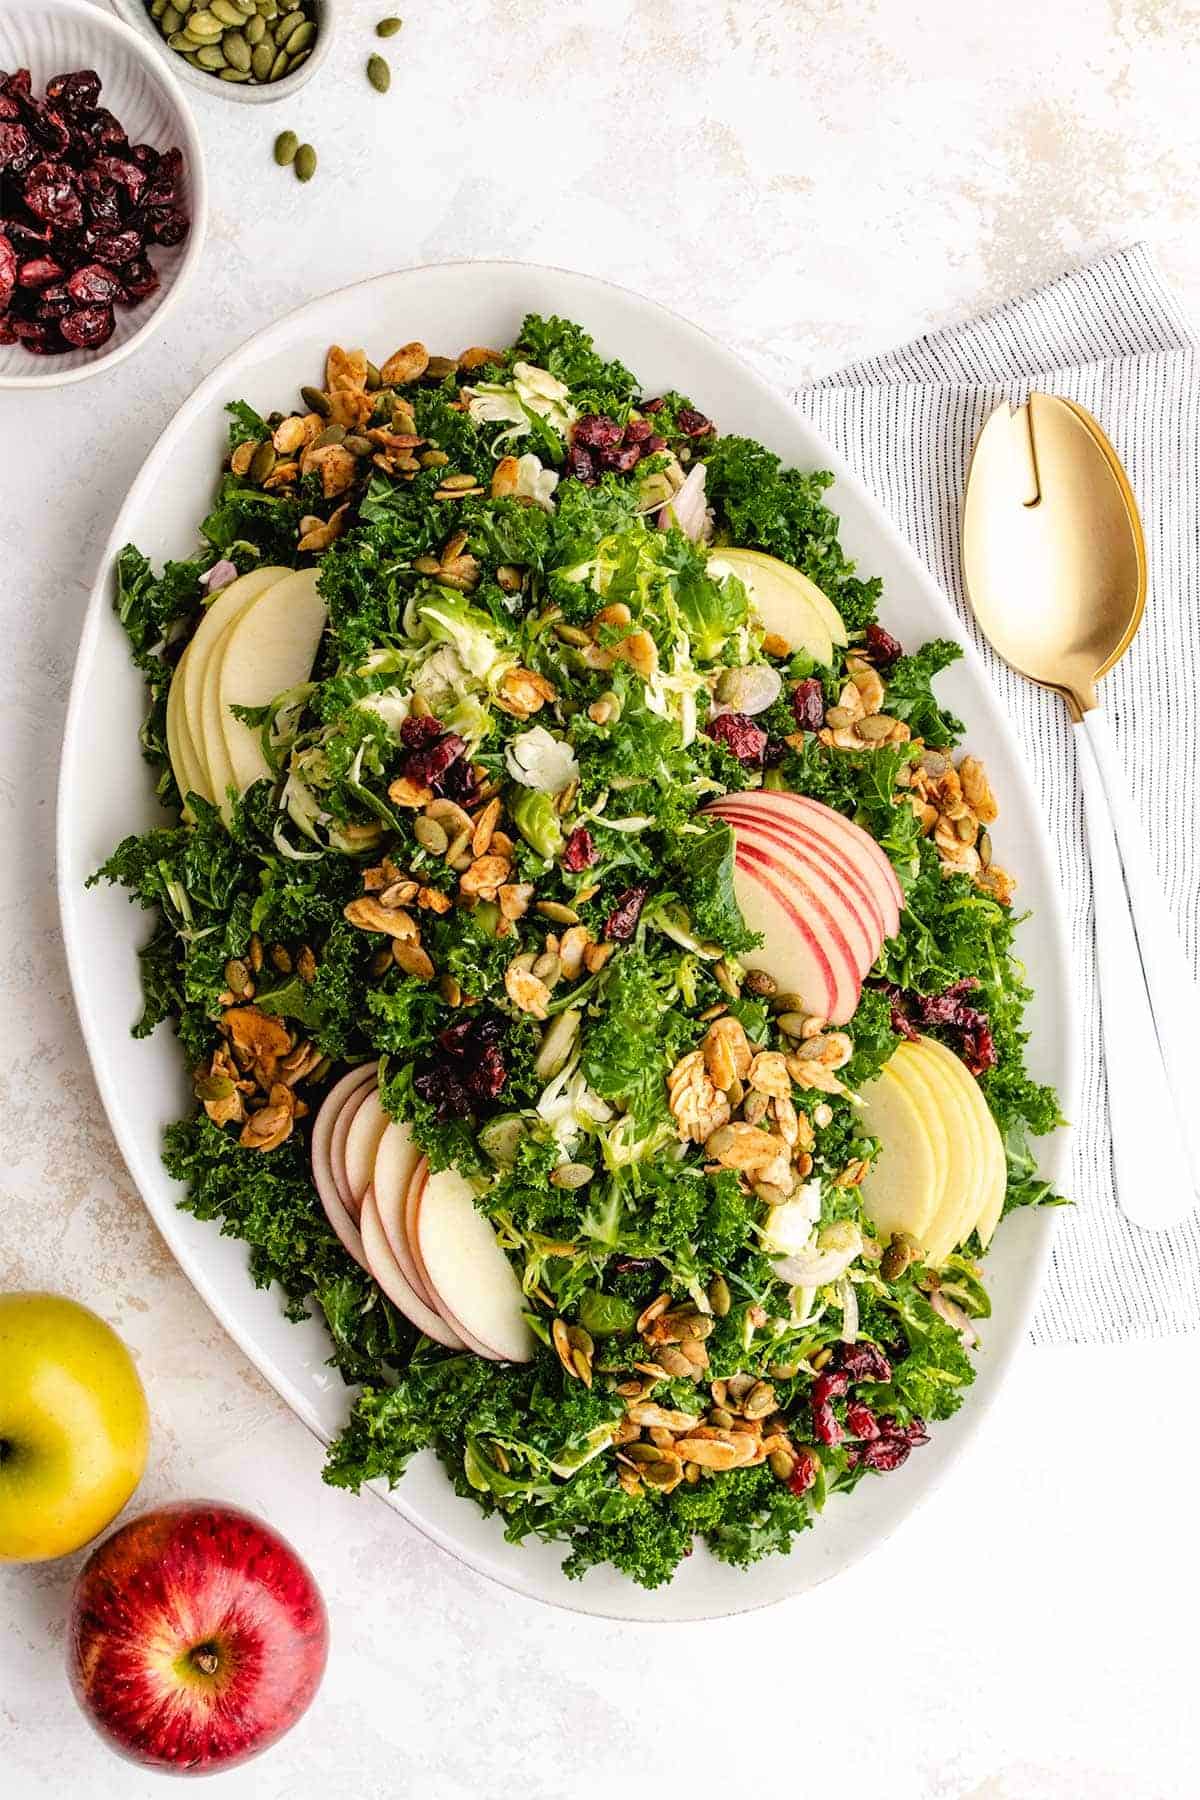 Kale and brussel sprout salad with apples, cranberries, and seeds sprinkled on top.